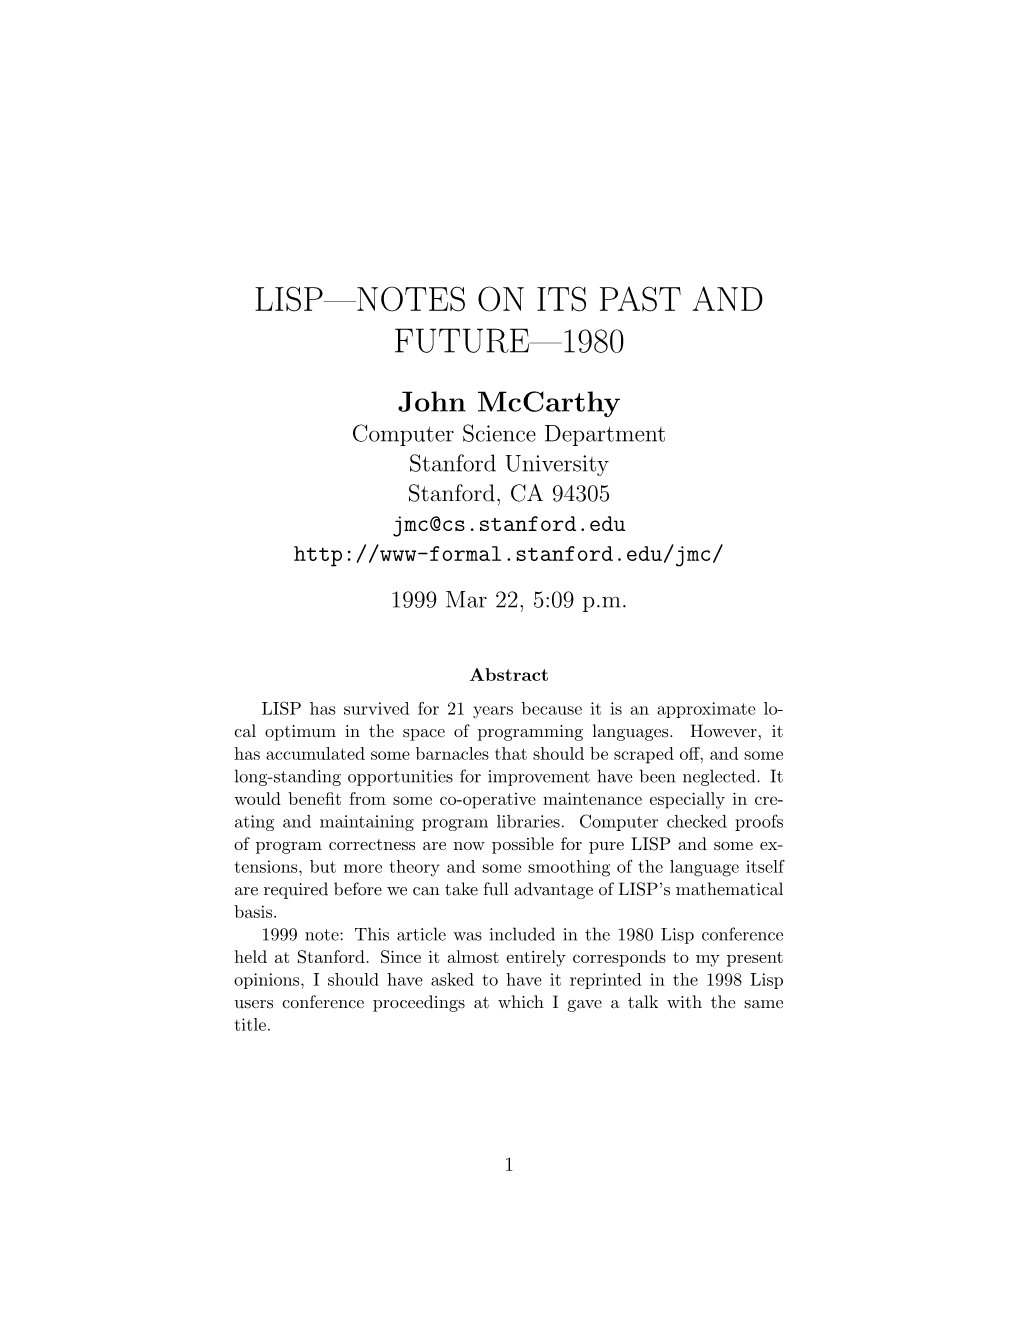 Lisp—Notes on Its Past and Future—1980